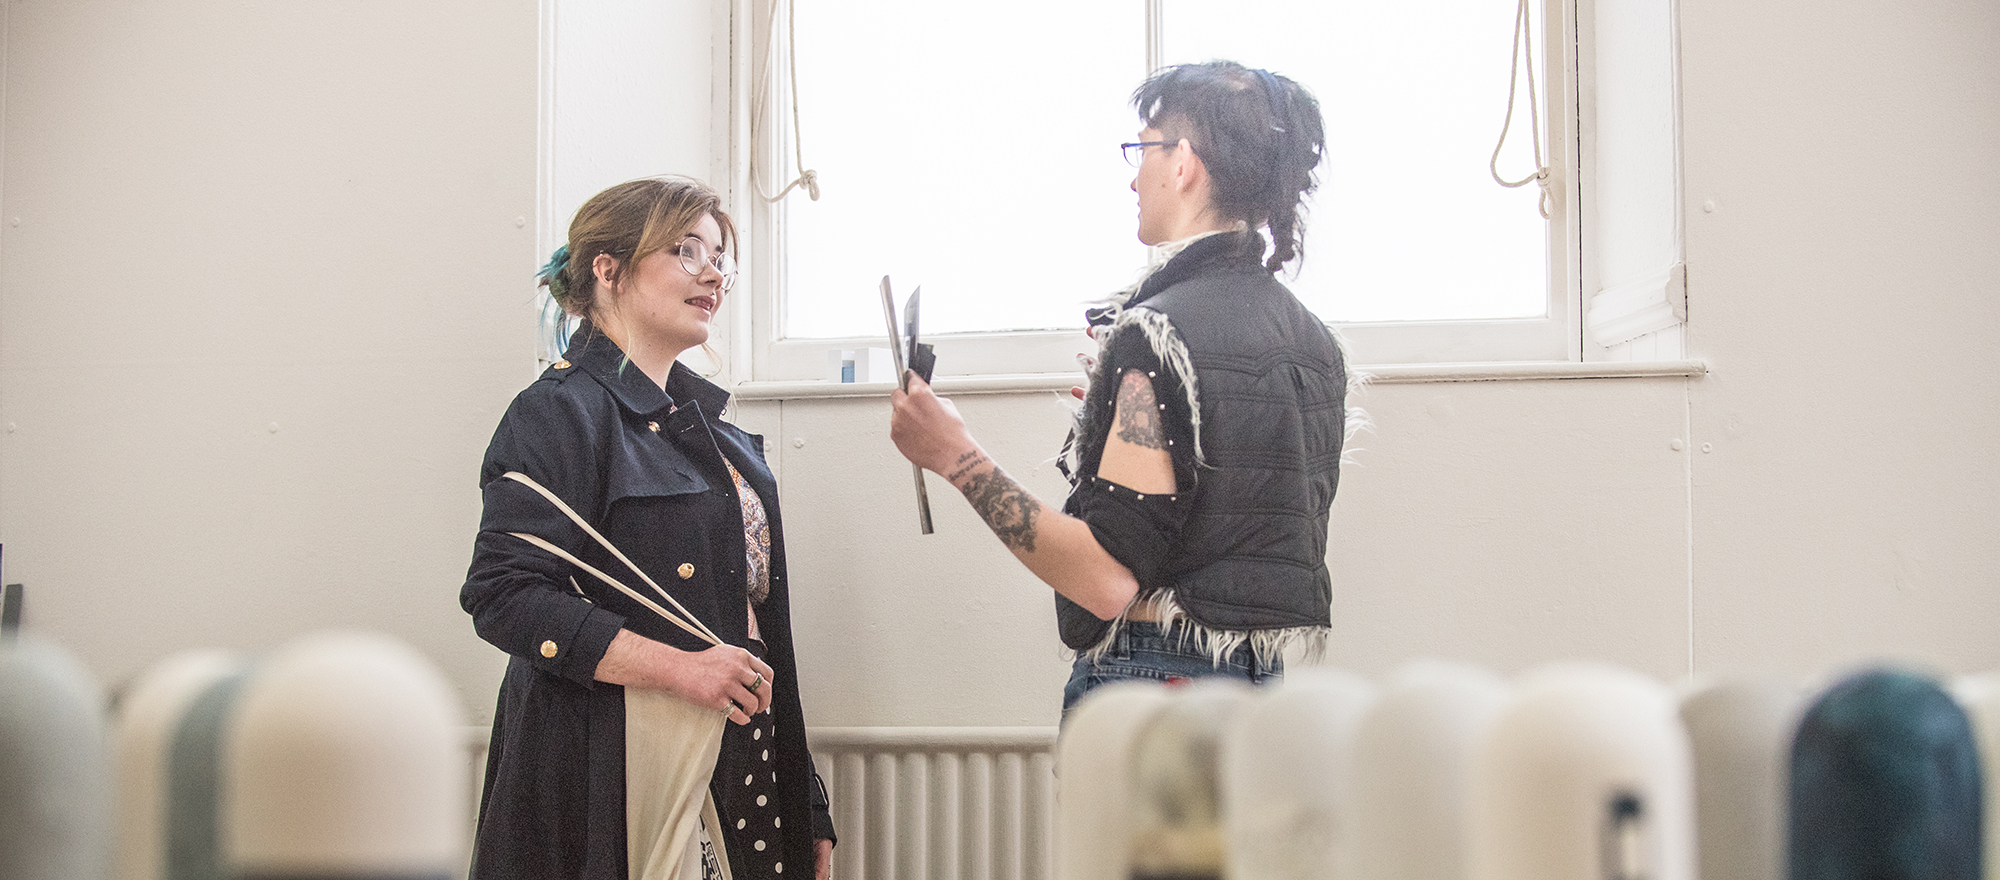 Two women smiling and chatting at the 2019 Moray School of Art degree show